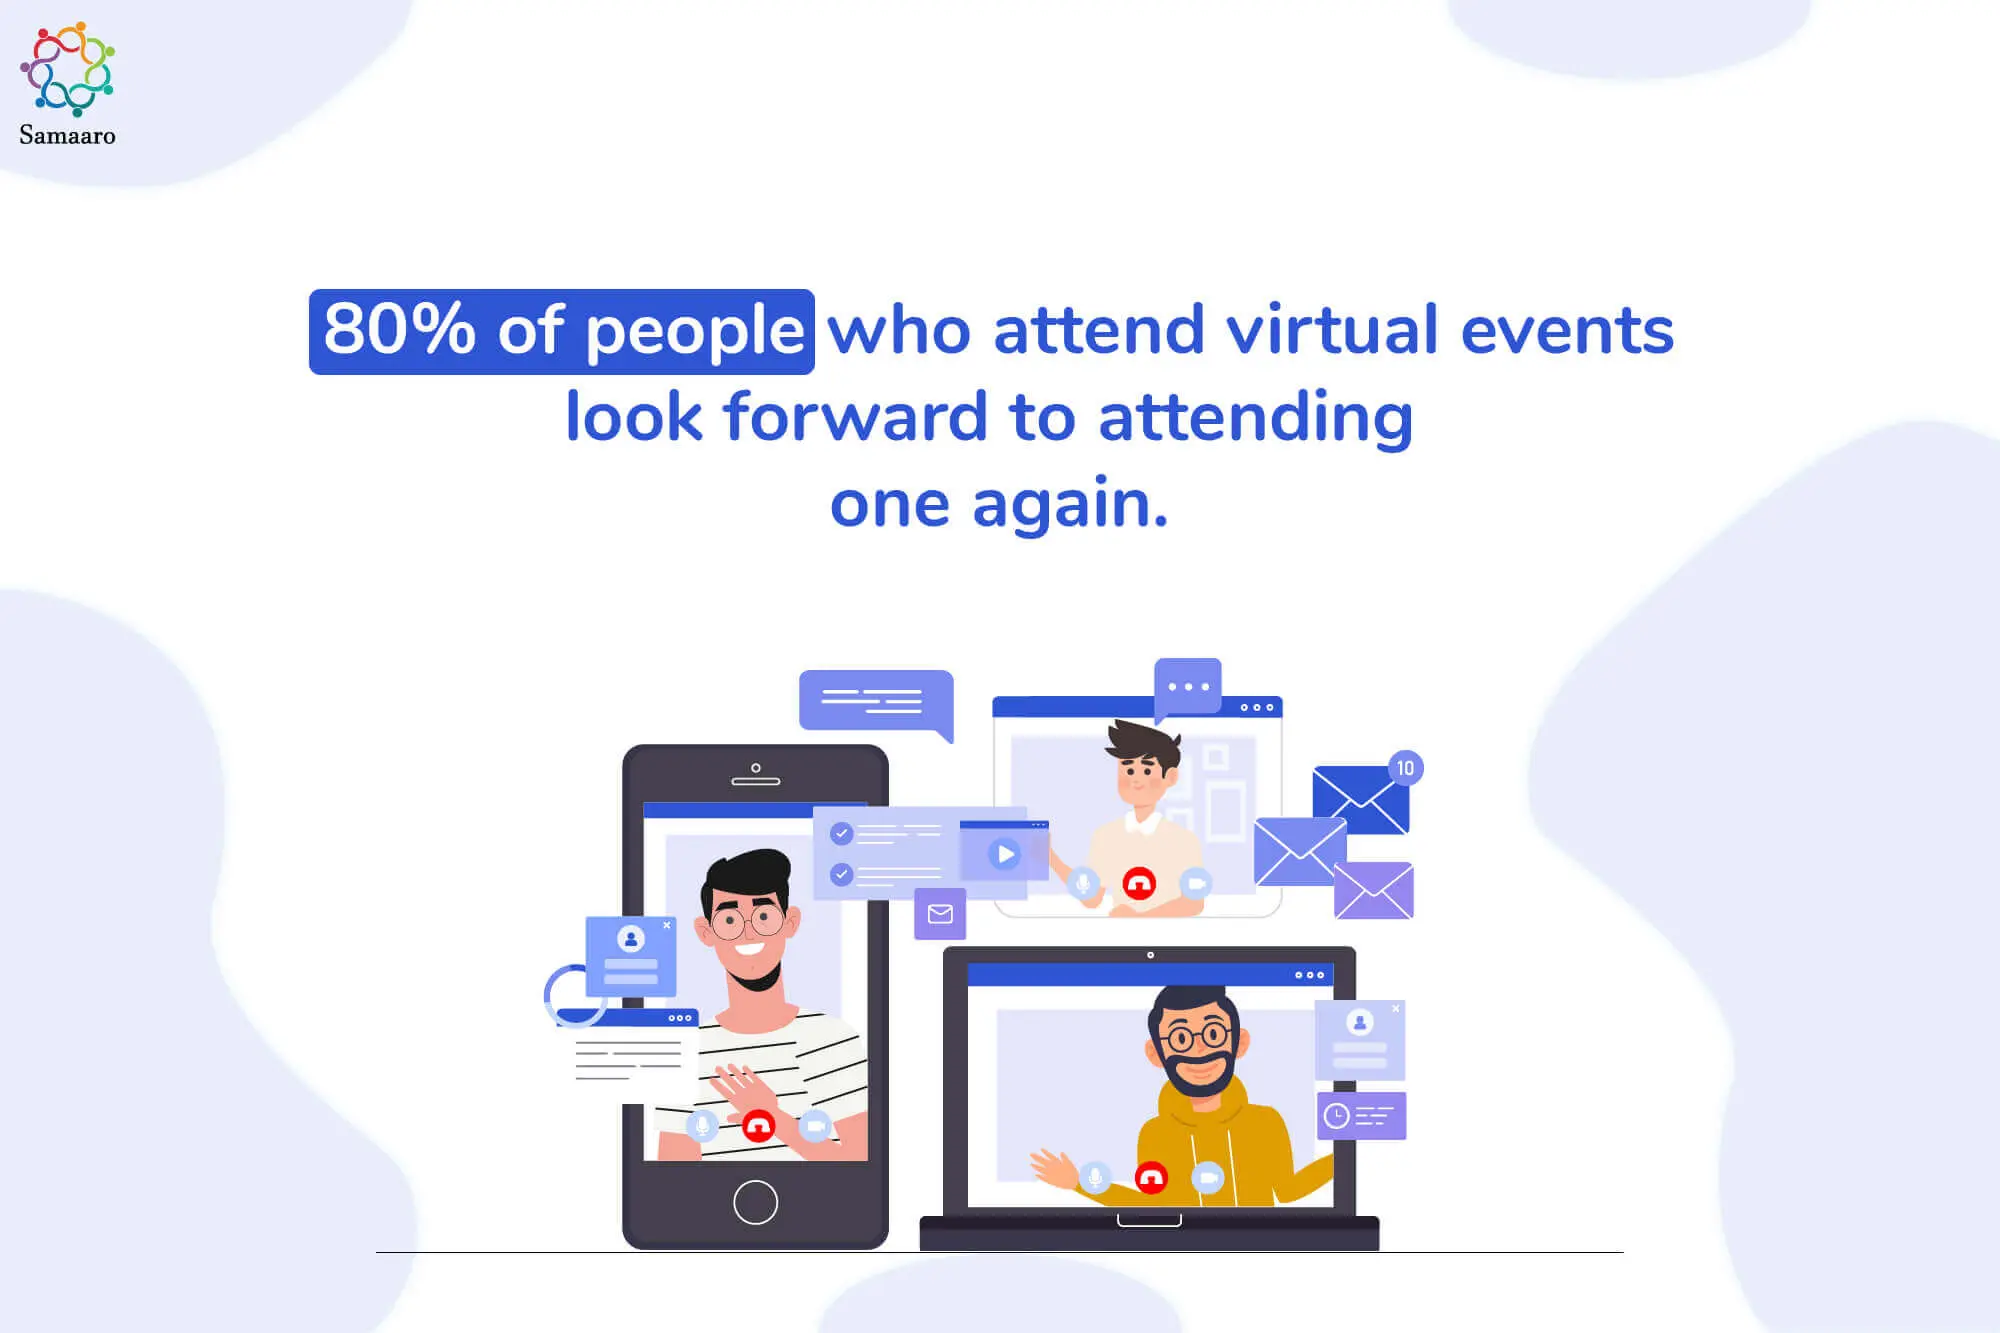 virtual event statistics: 80% people will attend virtual events again